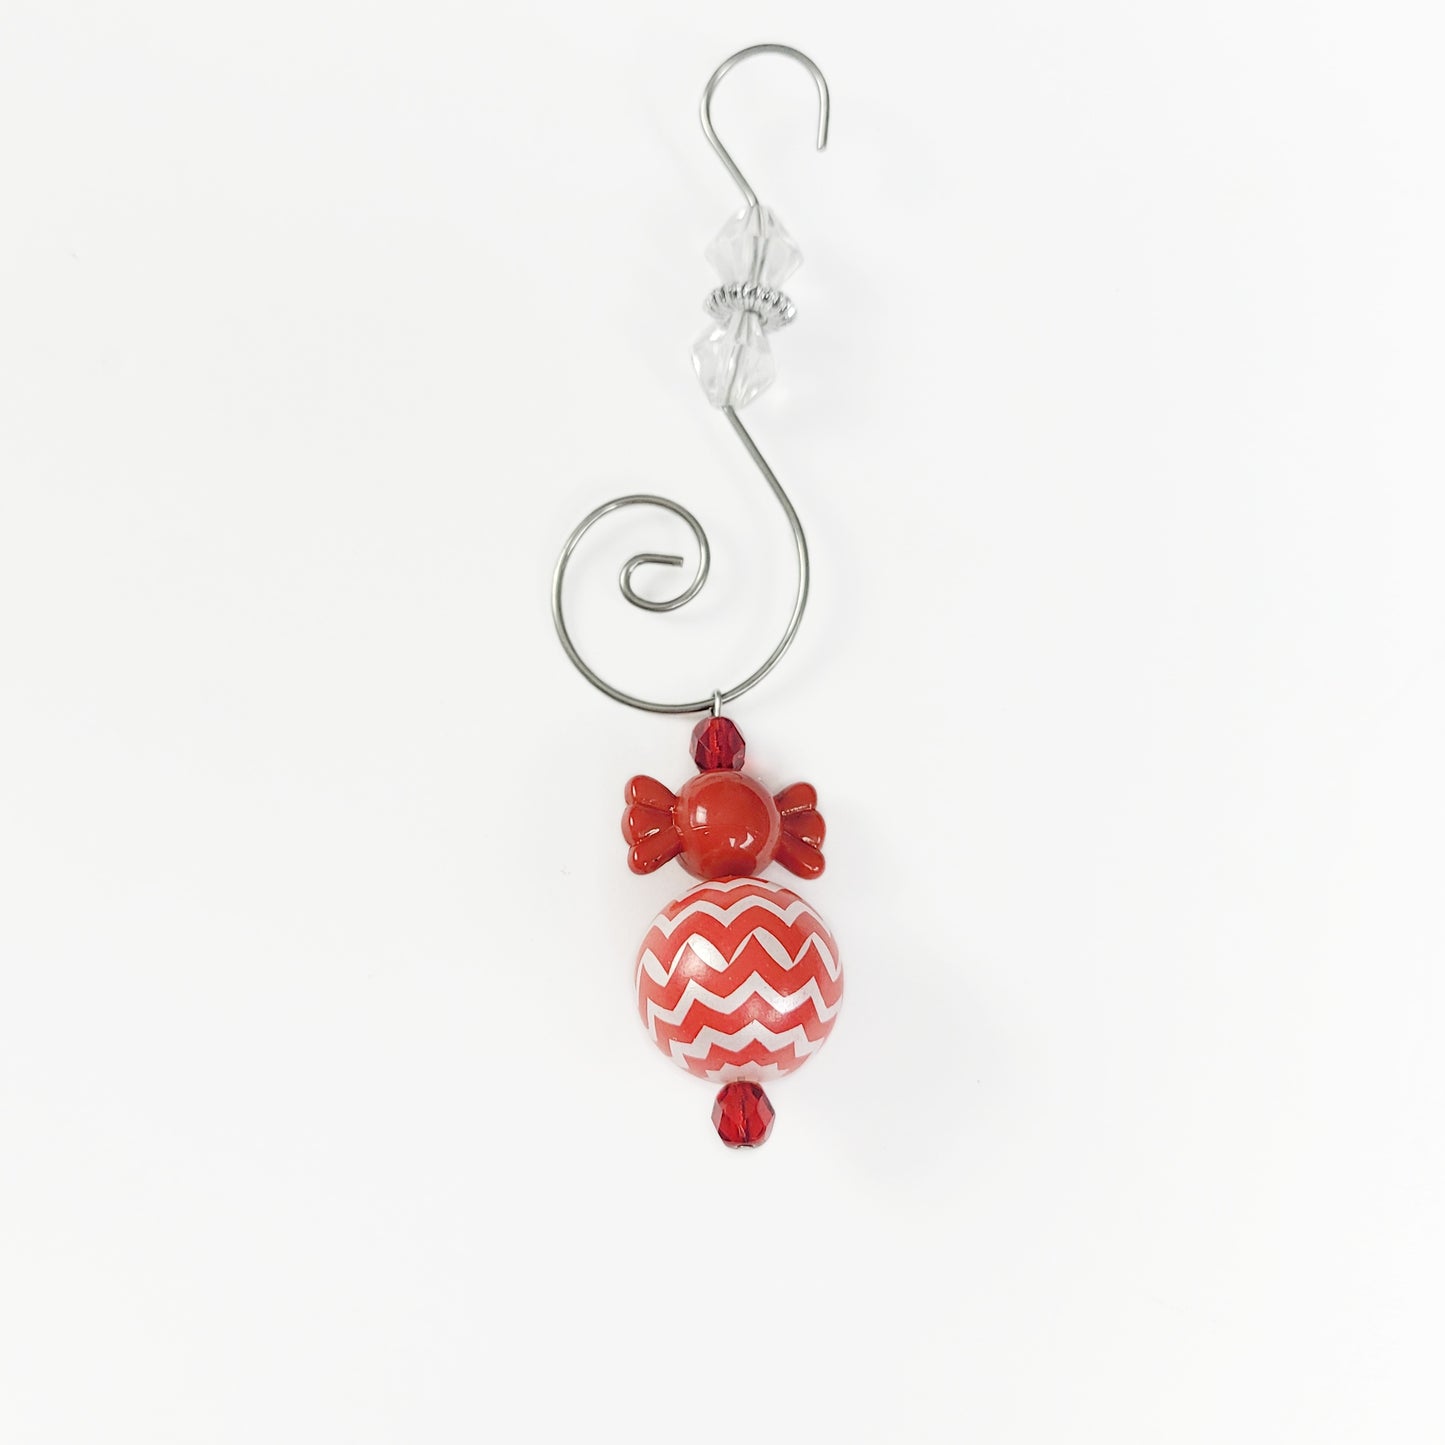 Red Ornament - Peppermint Candy Ornament